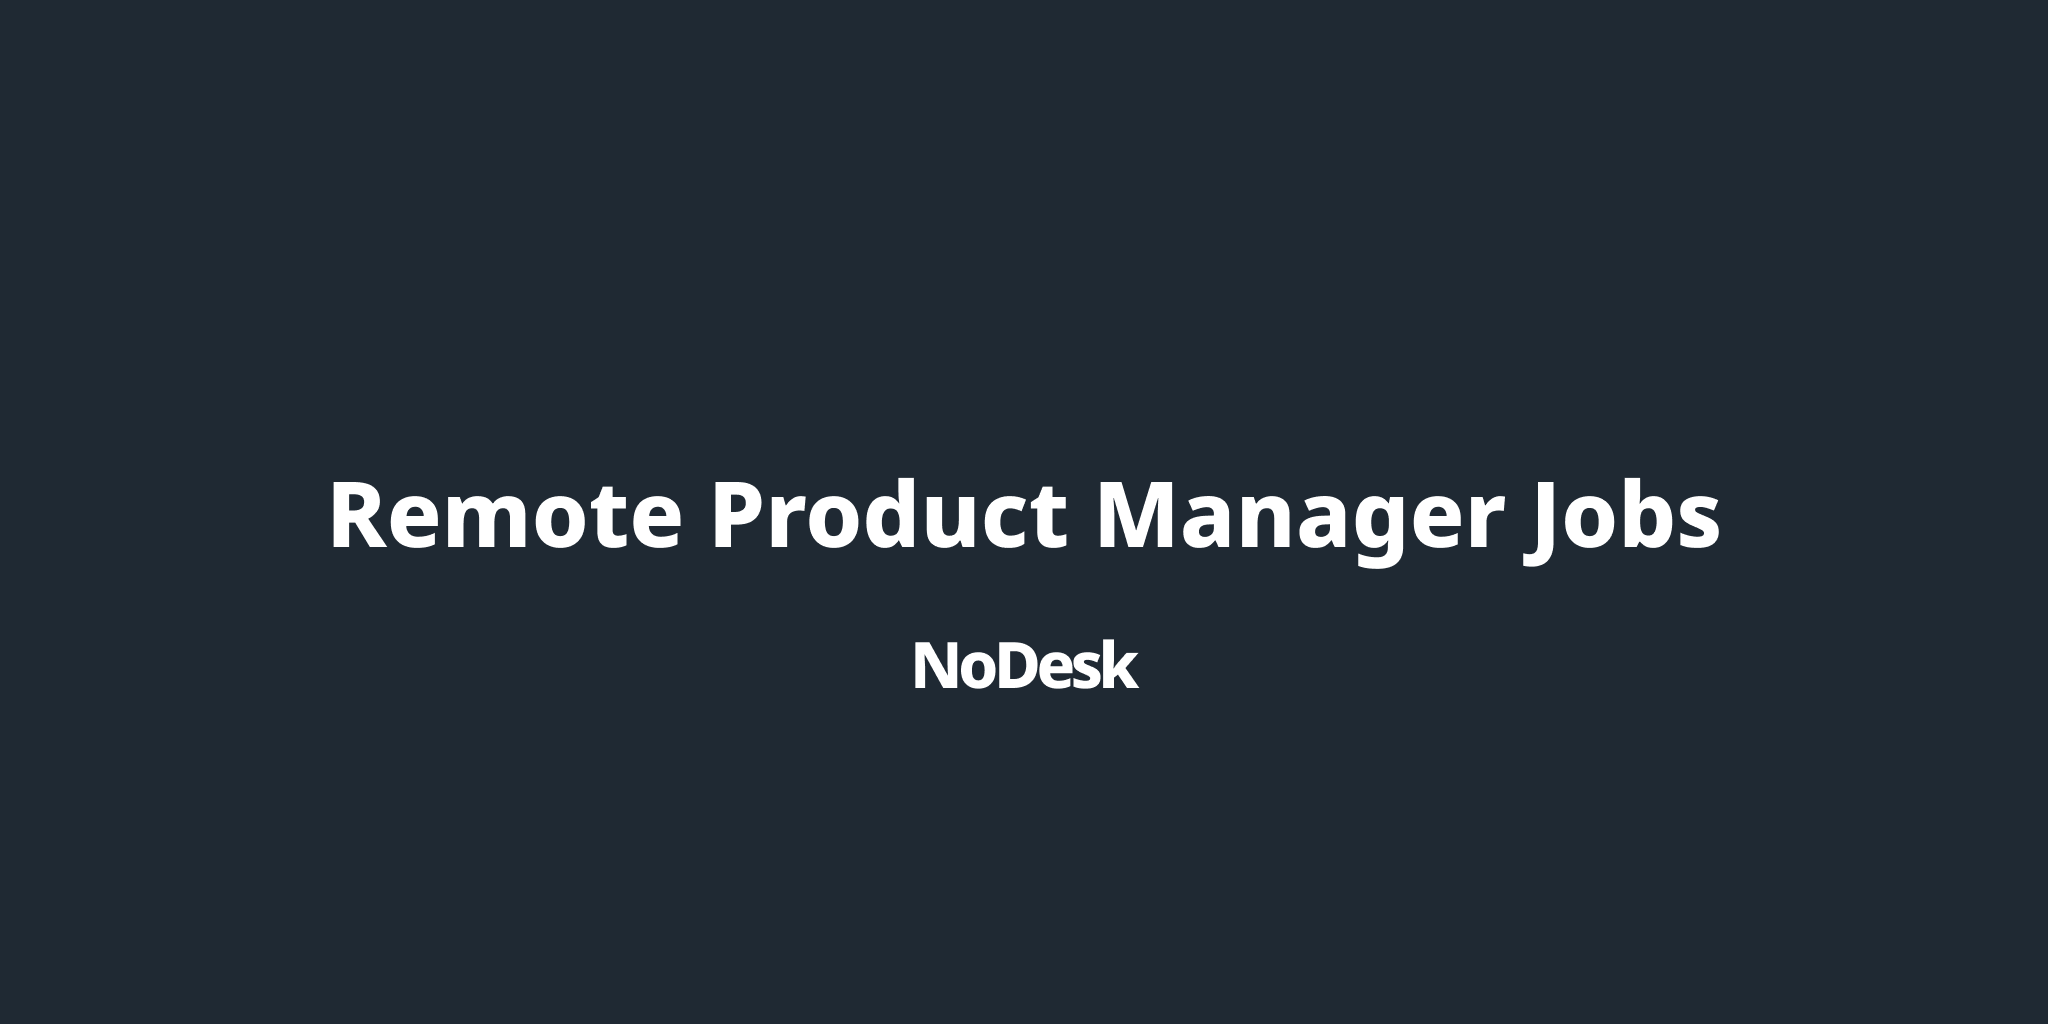 remote-product-manager-jobs-nodesk